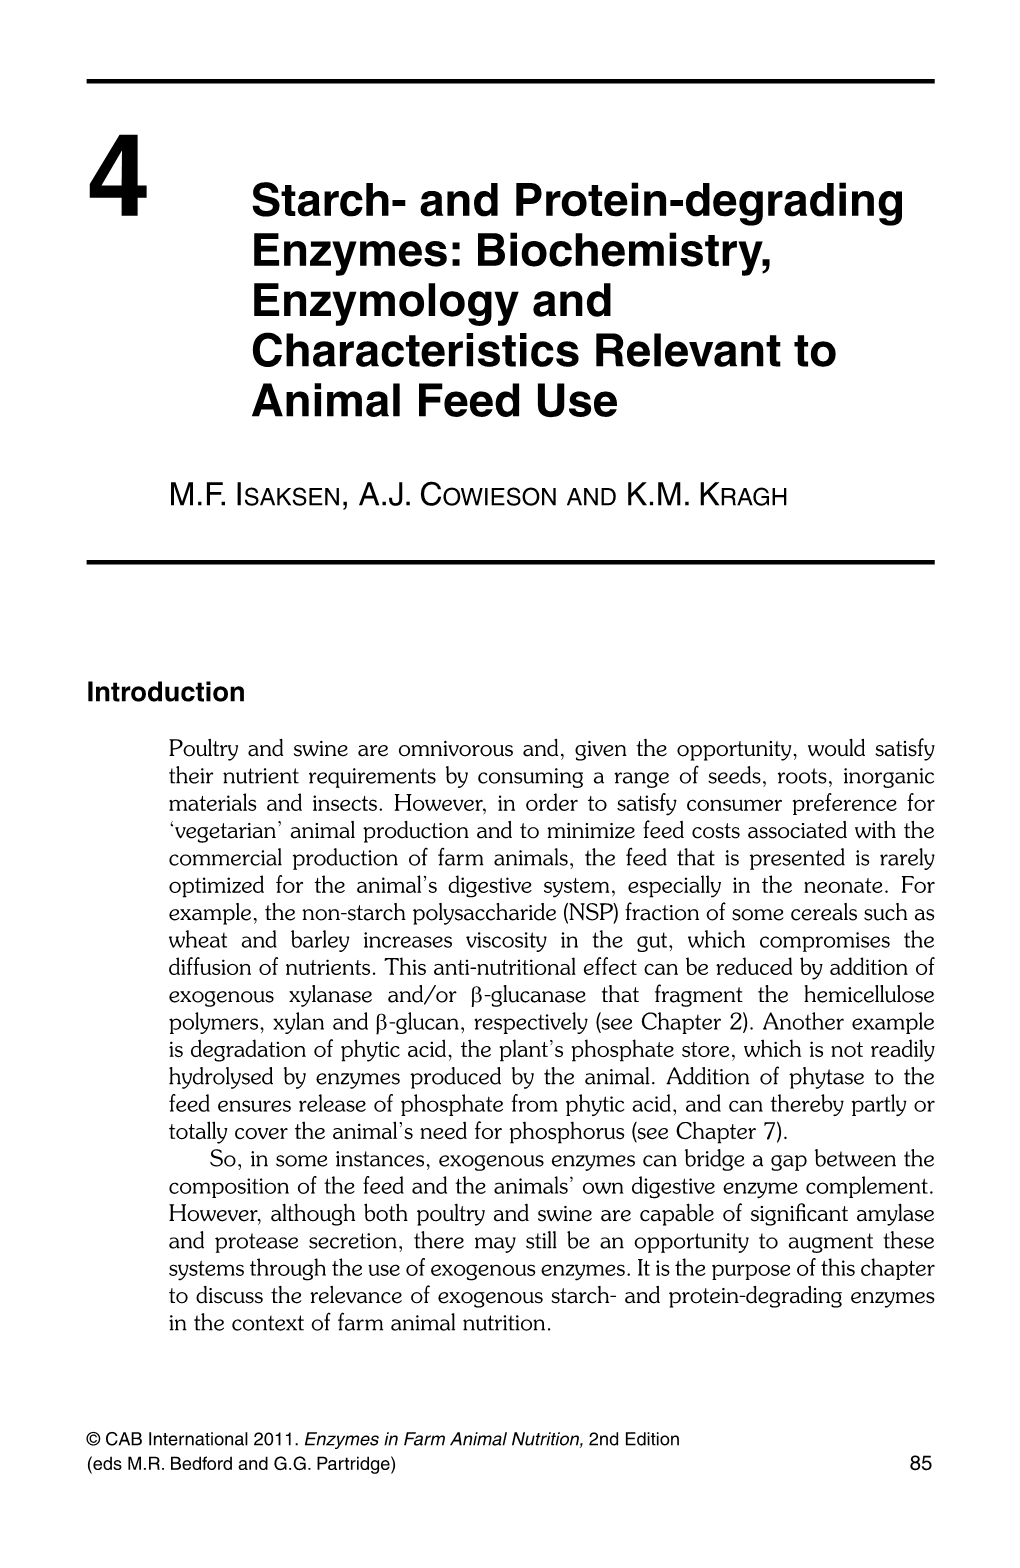 4 Starch- and Protein-Degrading Enzymes: Biochemistry, Enzymology and Characteristics Relevant to Animal Feed Use